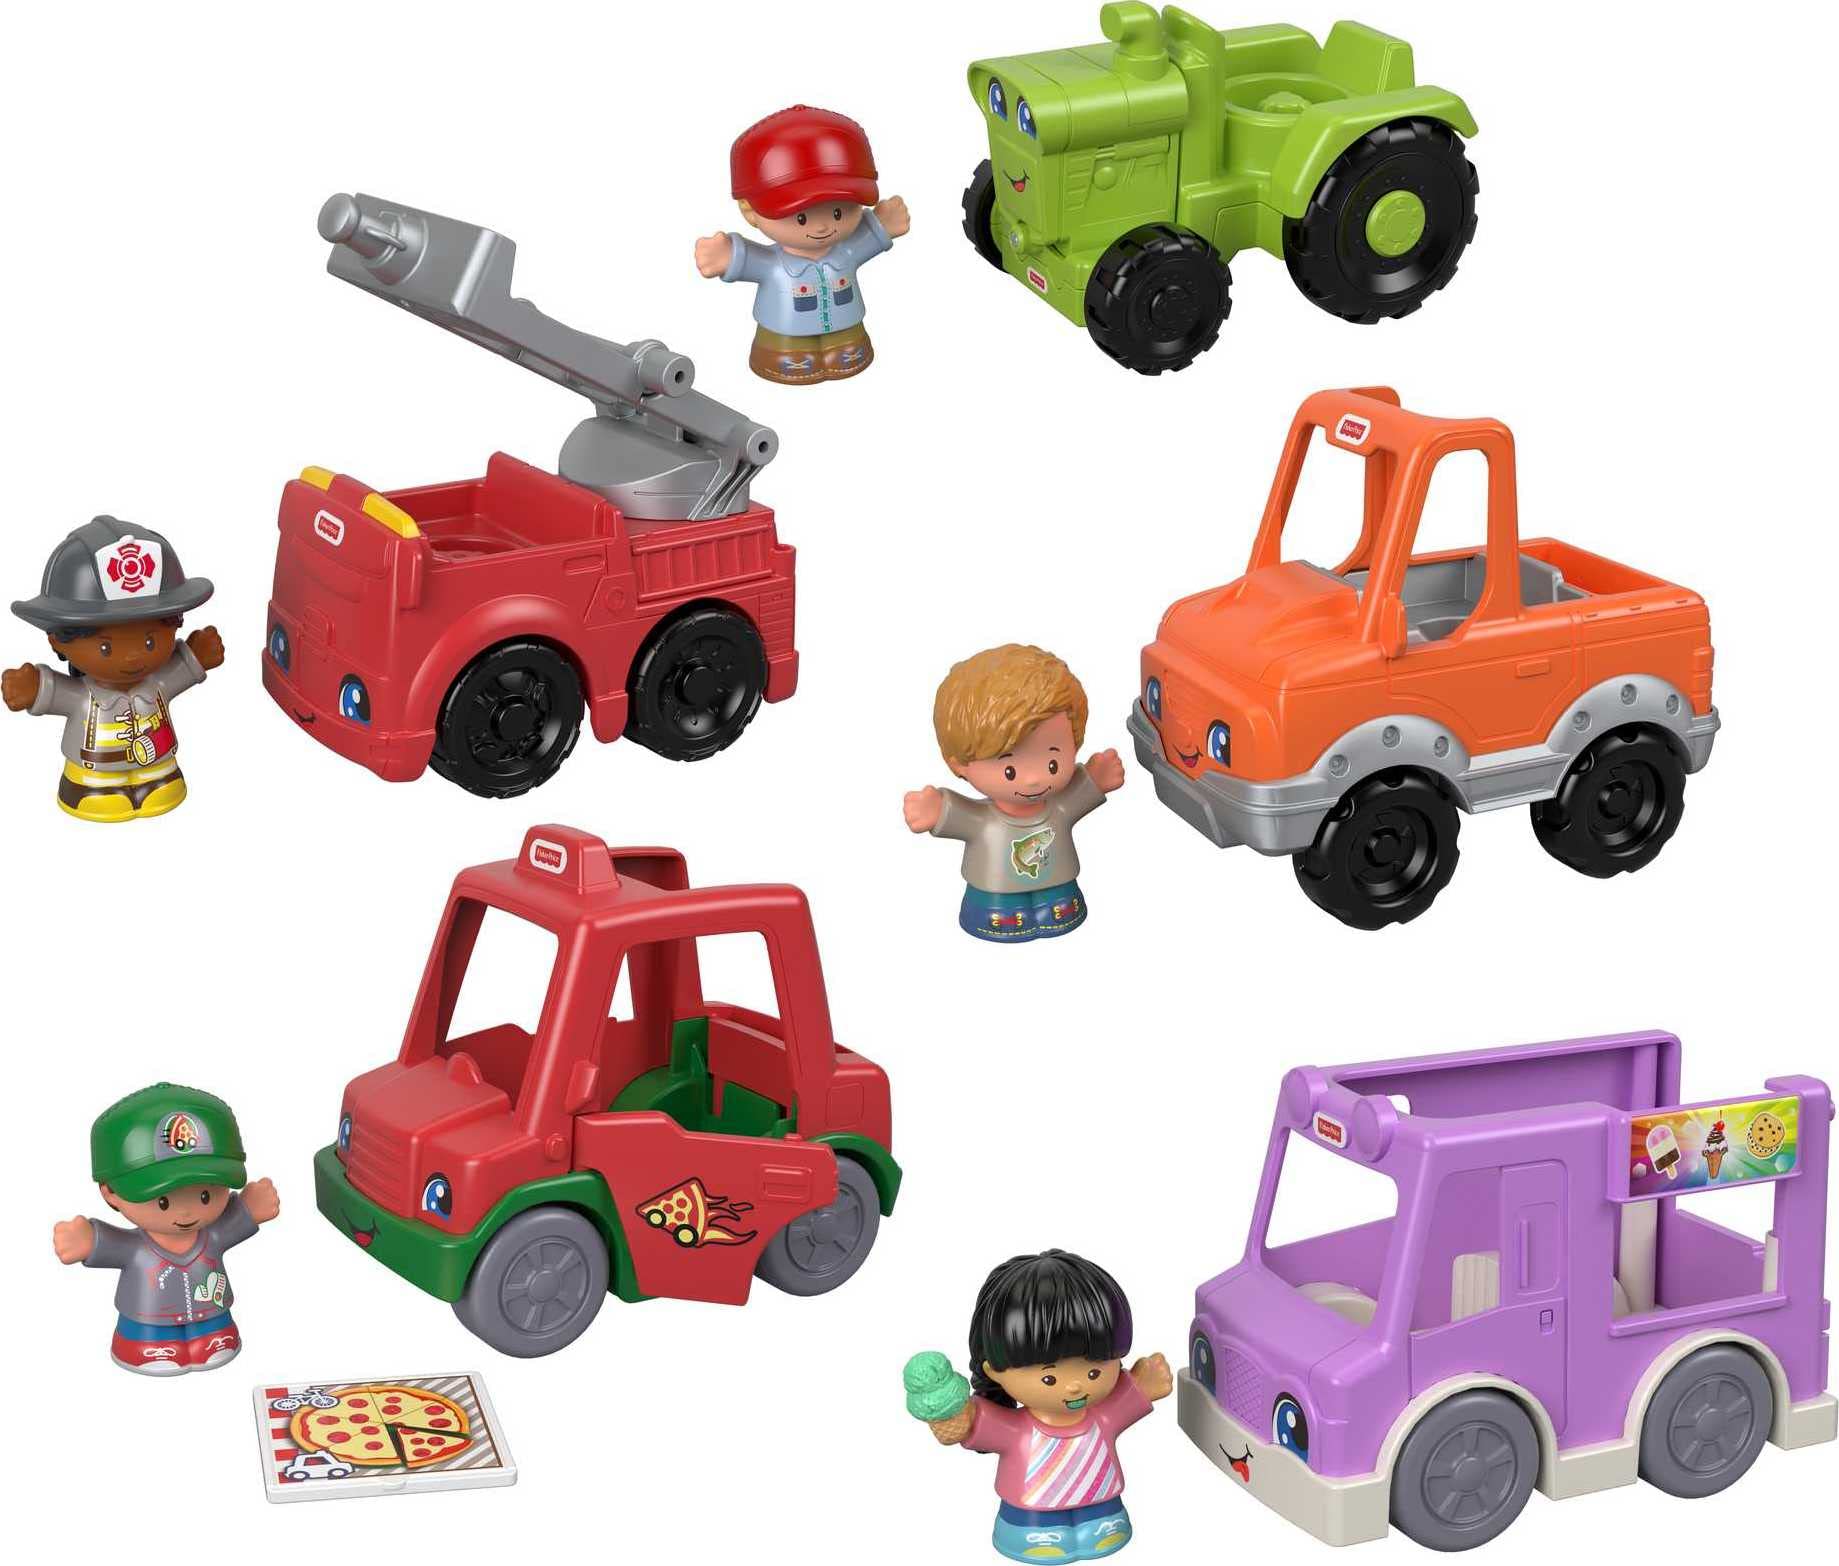 Fisher-Price Little People Toddler Playset Around the Neighborhood Vehicle Pack, 5 Toy Cars & Trucks and 5 Figures for Ages 1+ Years (Amazon Exclusive)